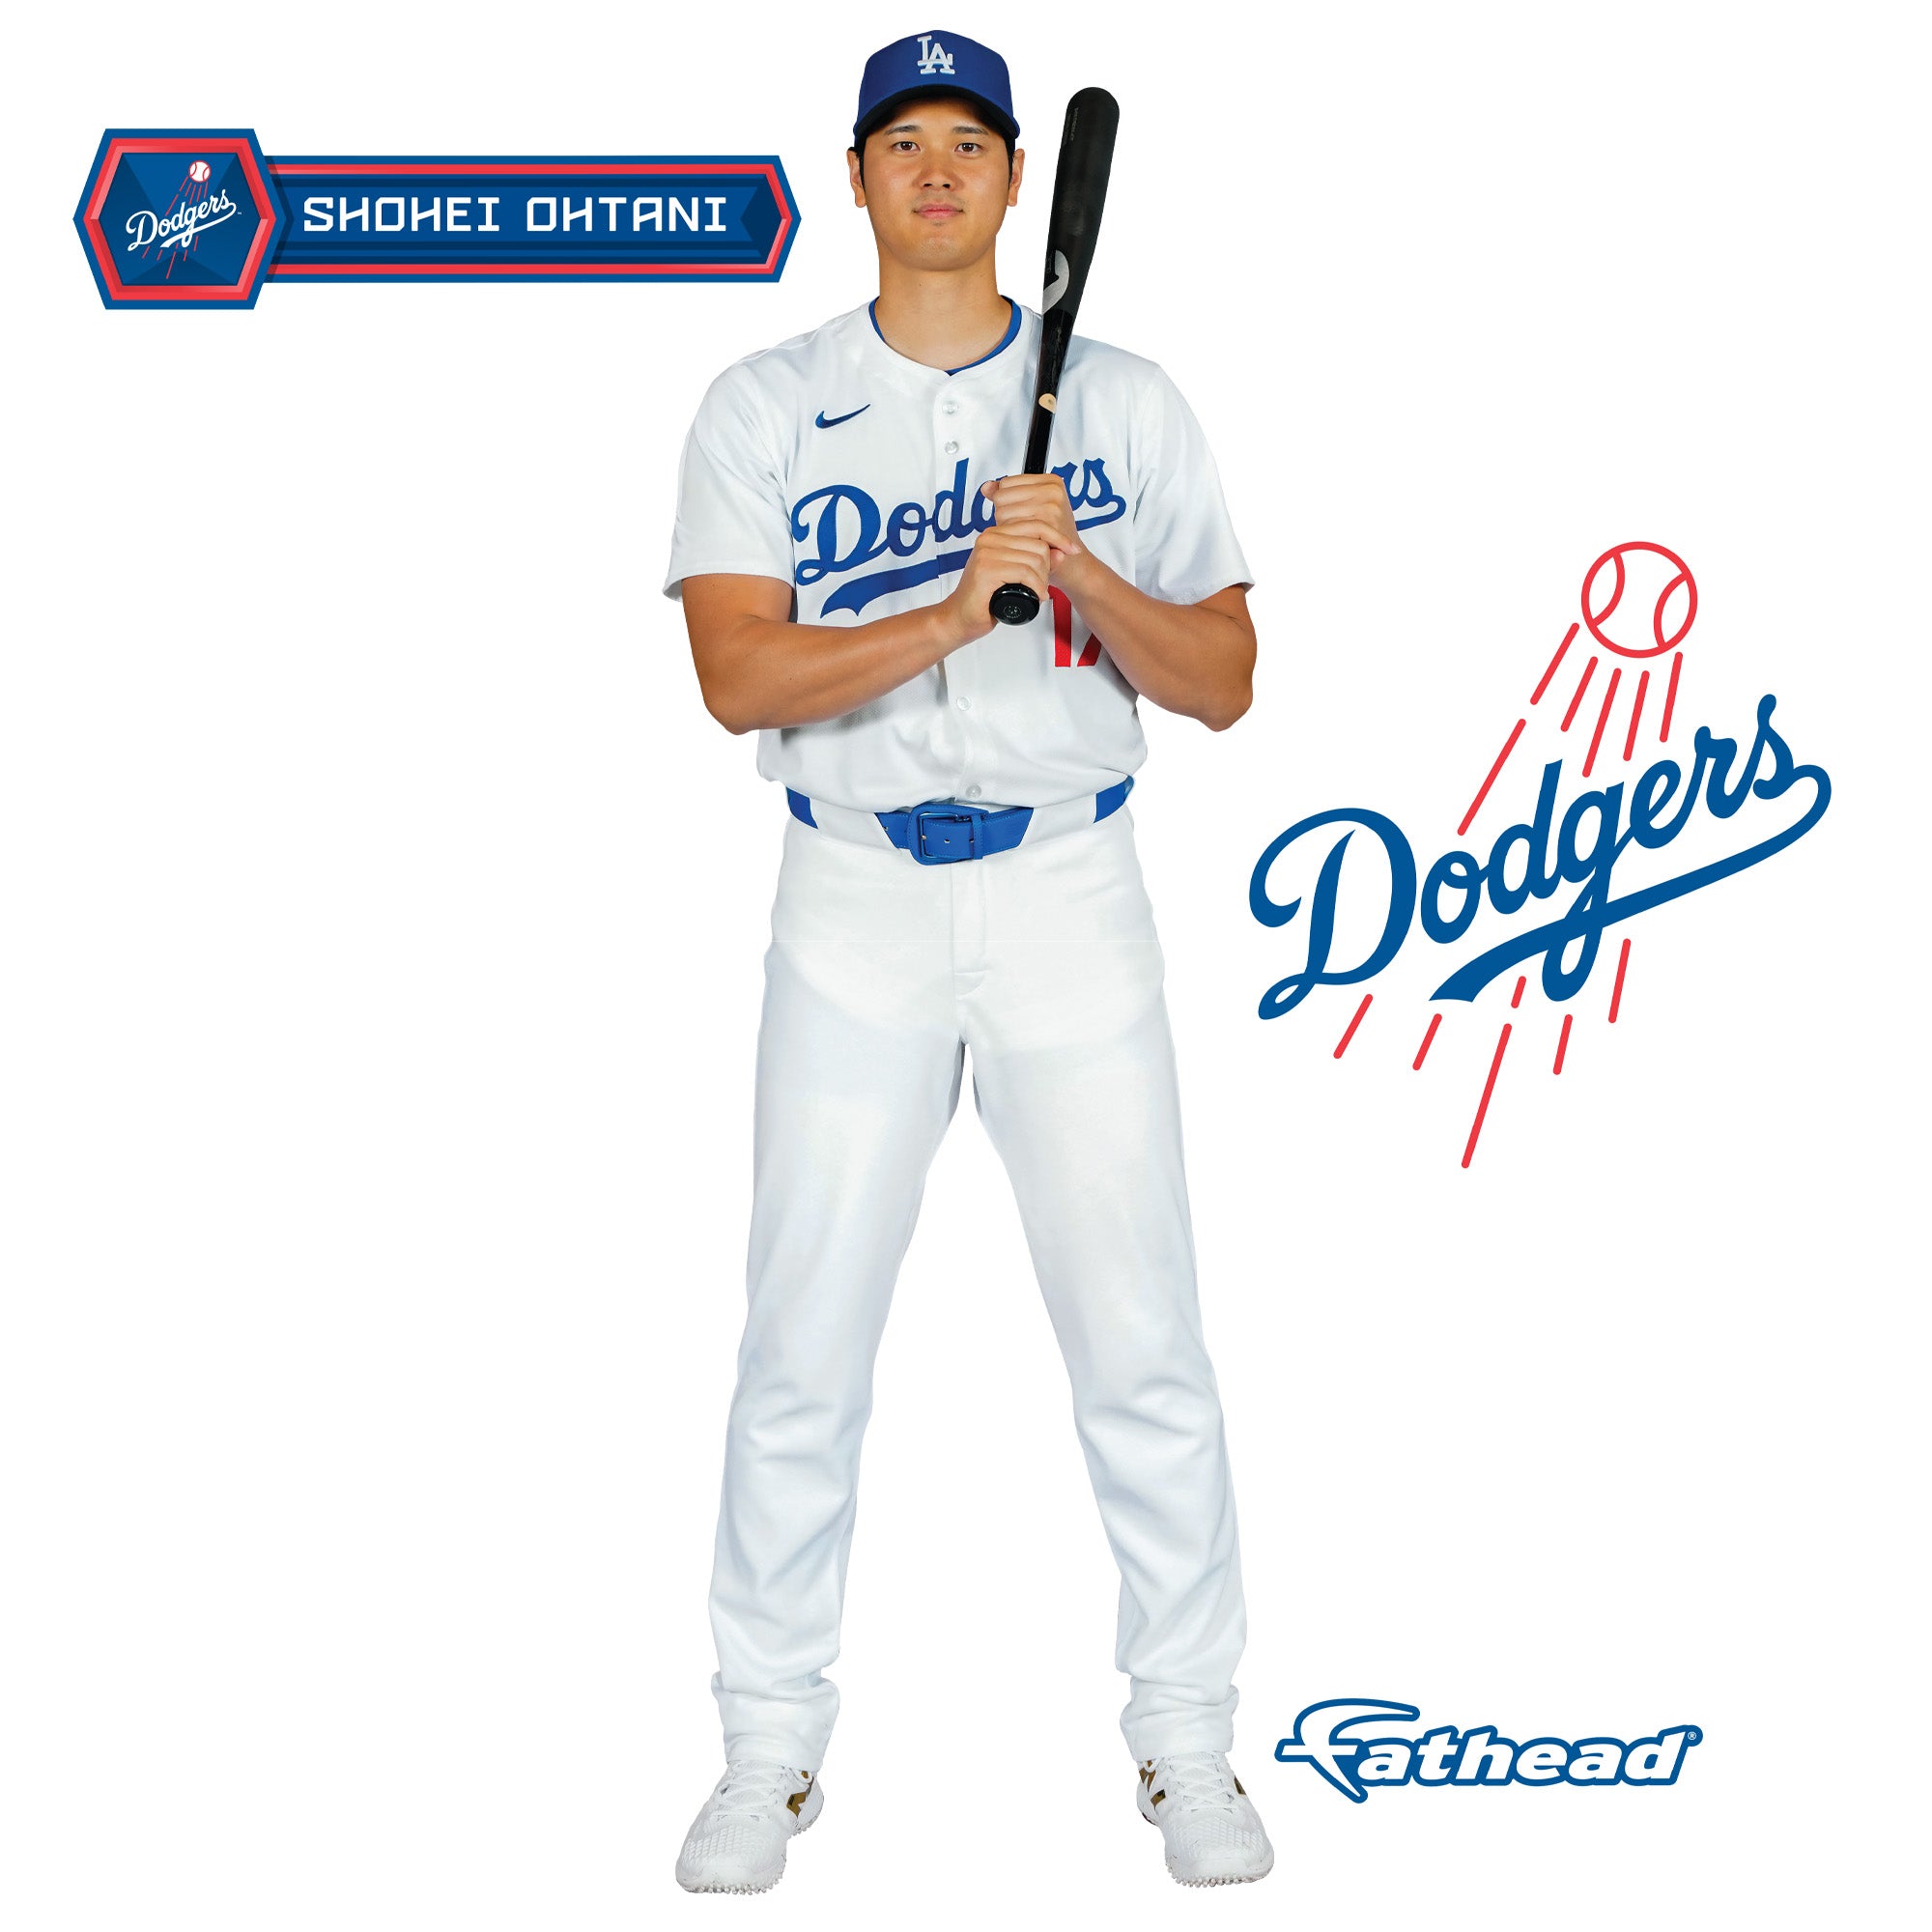 SHOHEI OHTANI LOS ANGELES DODGERS 3 PIECE MULTI-USE DECAL FAN PACK MLB LICENSED 海外 即決